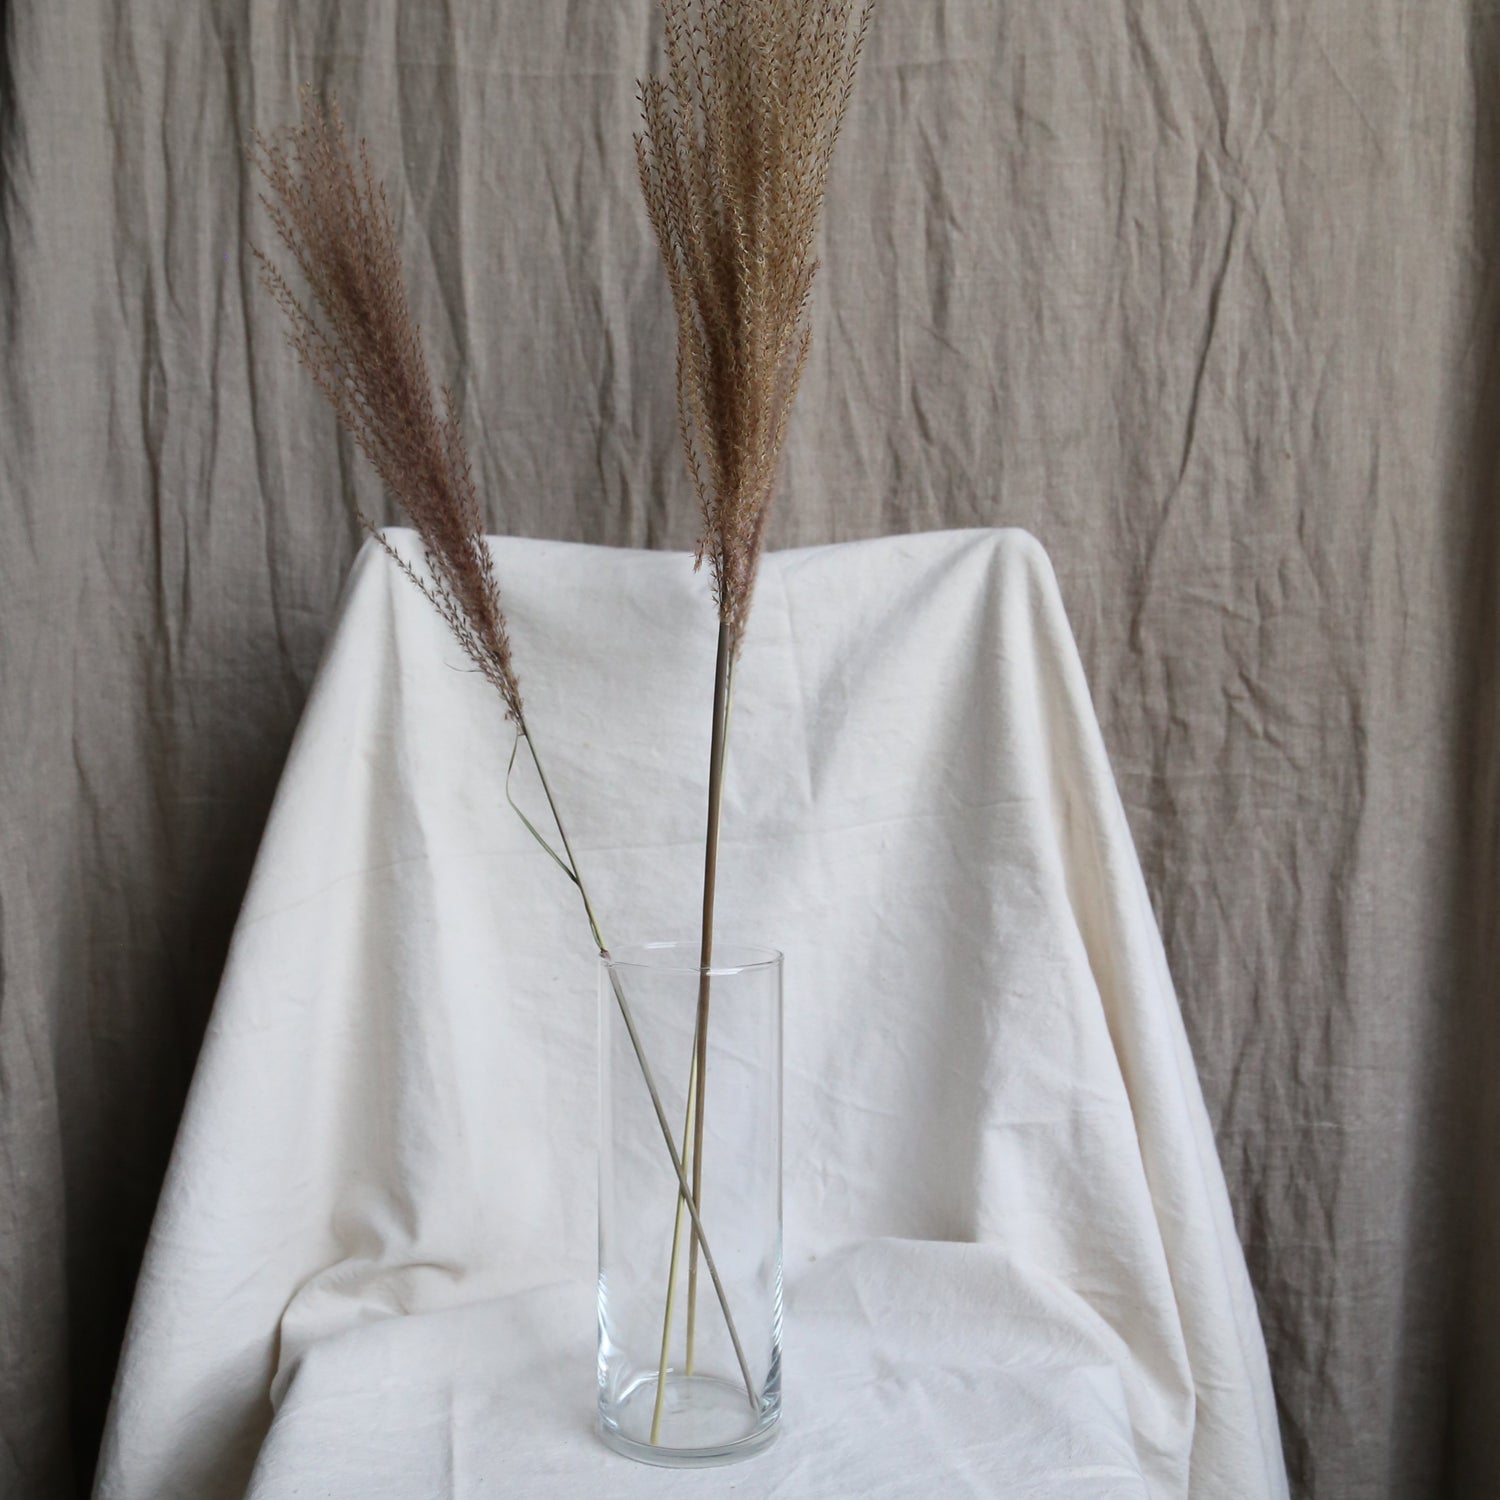 Brown eulaila grass bunch available at Rook & Rose.